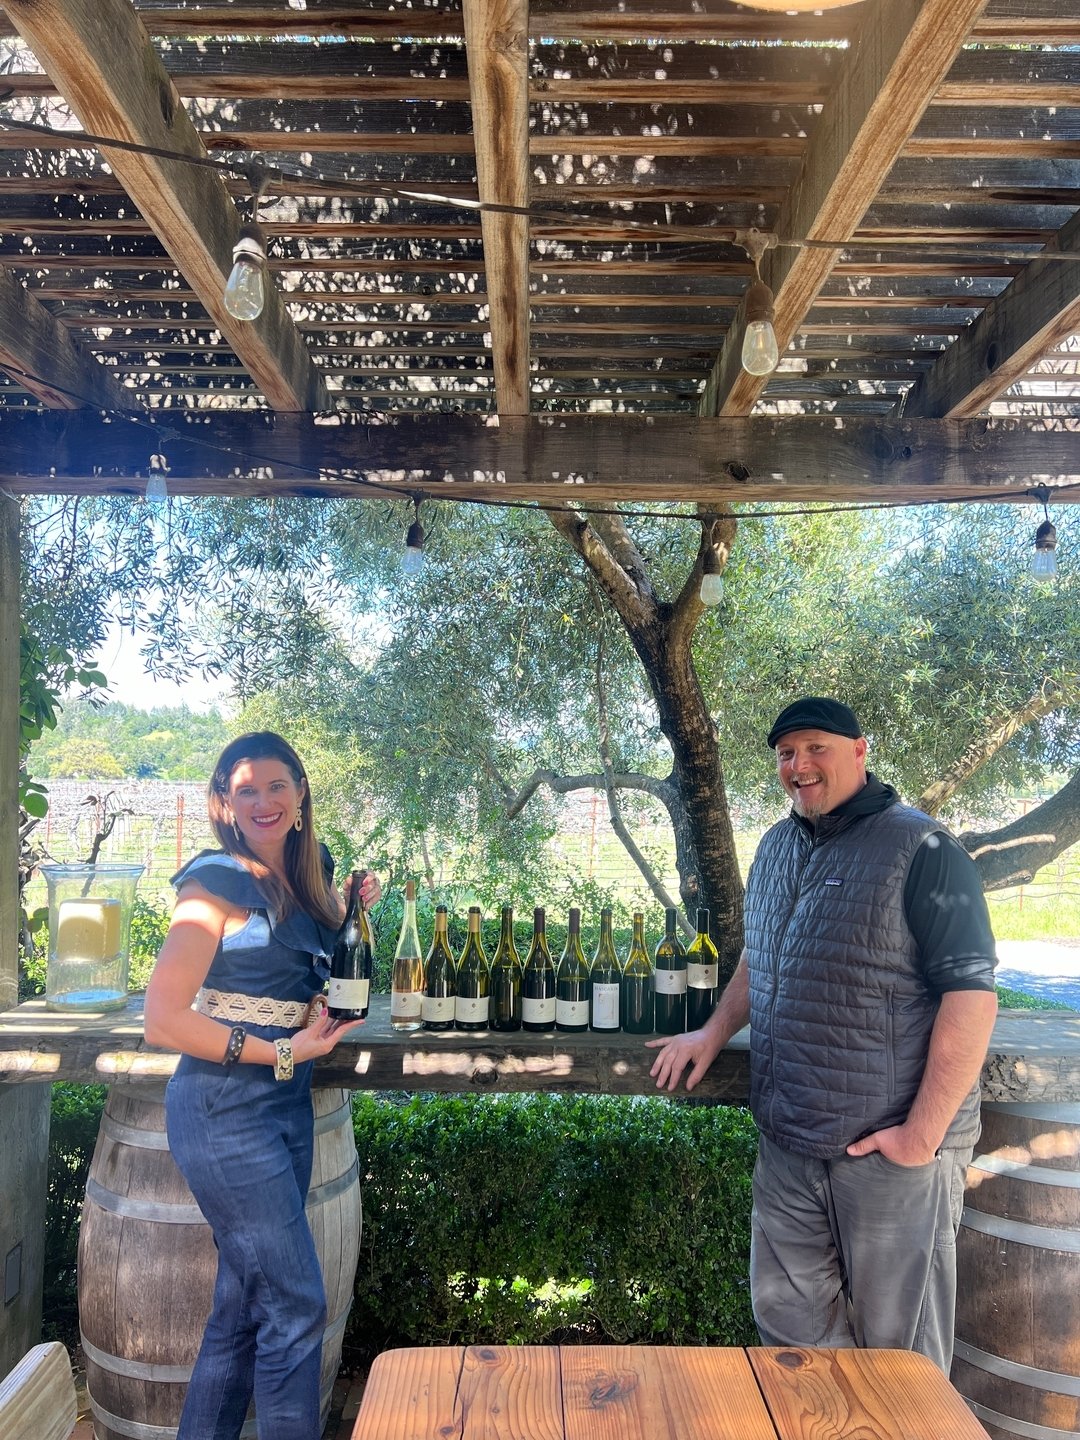 Join us for an enchanting Winemaker Dinner hosted by Emily Martin Events at The Matheson in Healdsburg on Saturday, June 1st, featuring the exceptional talents of Matt Taylor, Winemaker of 32 Winds Winery. We will also introduce the latest addition t